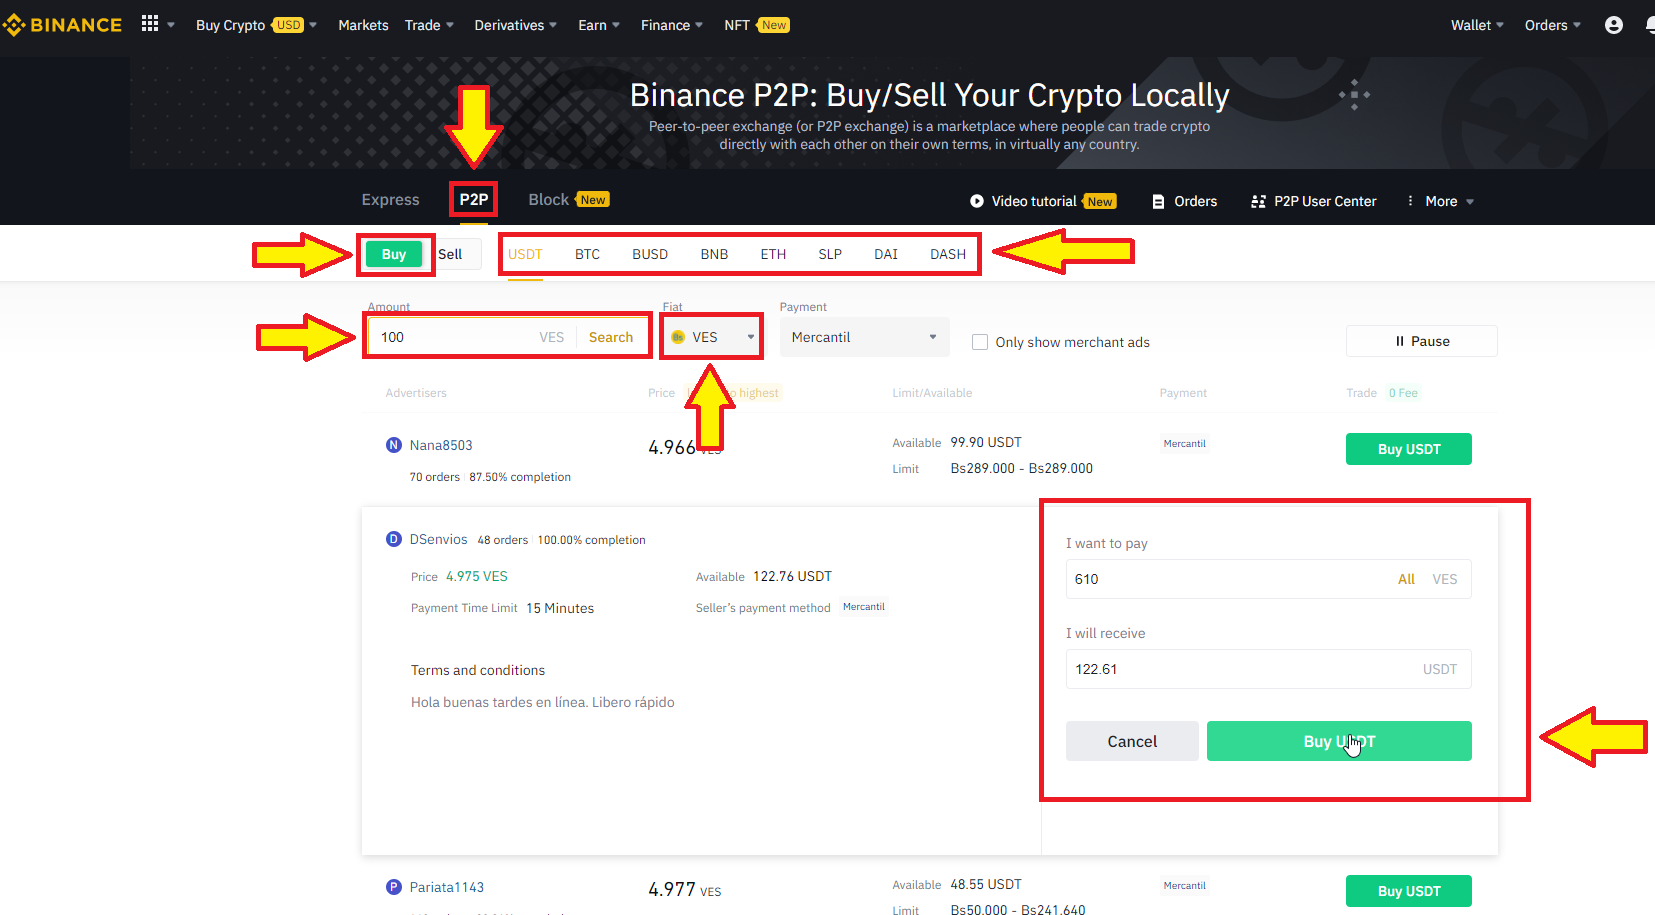 Buy SuperRare crypto in P2P with a verified account on Binance